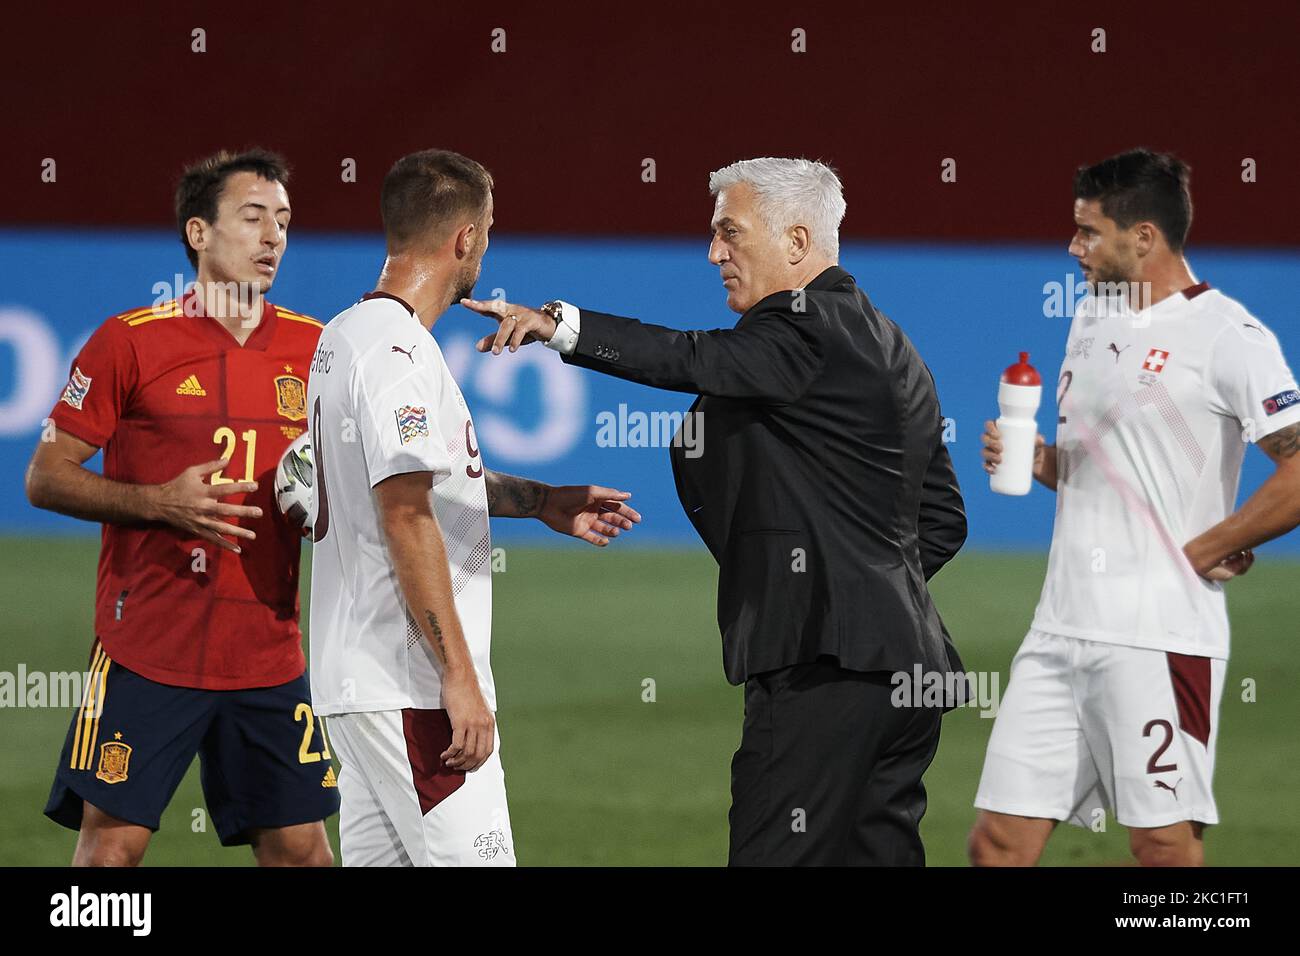 Vladimir Petkovic head coach of Switzerland gives instructions during the UEFA Nations League group stage match between Spain and Switzerland at Estadio Alfredo Di Stefano on October 10, 2020 in Madrid, Spain. (Photo by Jose Breton/Pics Action/NurPhoto) Stock Photo